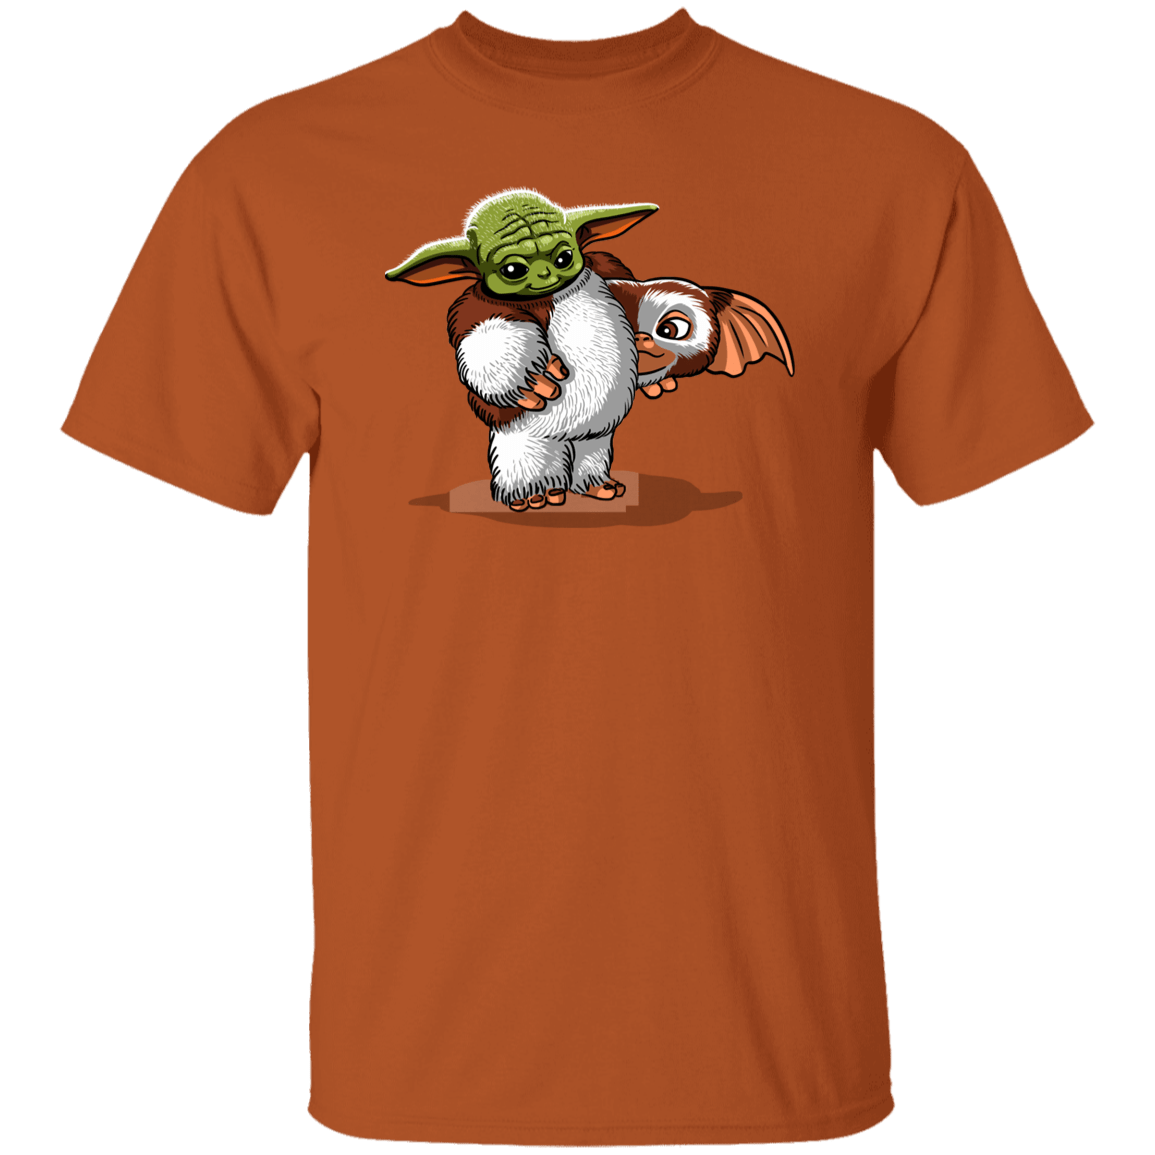 T-Shirts Texas Orange / S Baby in Disguise T-Shirt